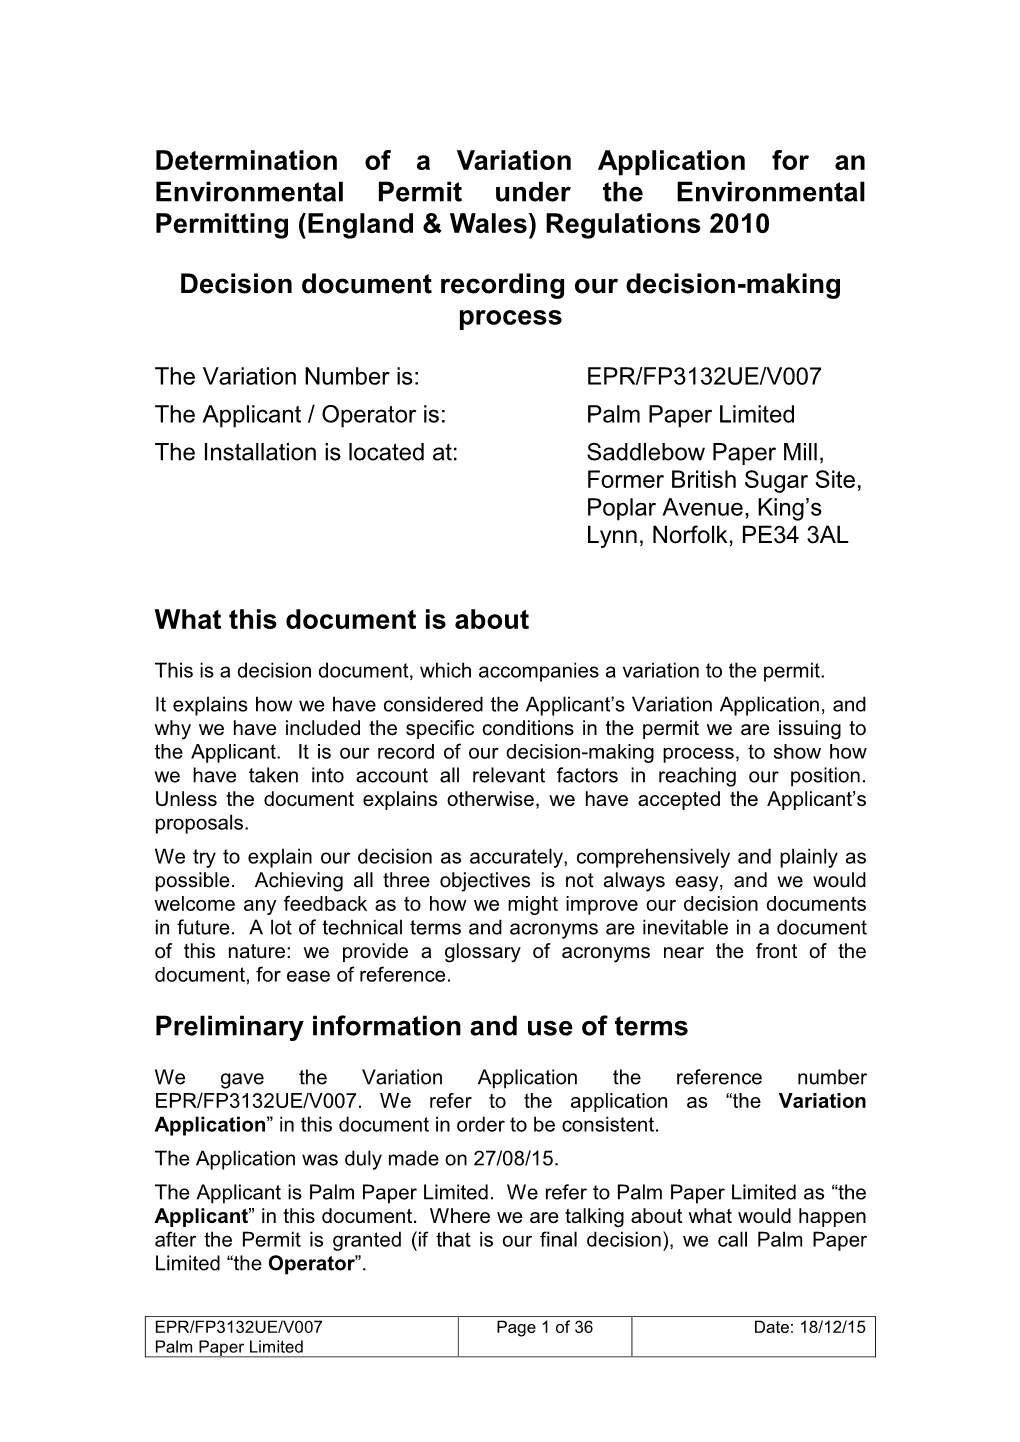 Determination of a Variation Application for an Environmental Permit Under the Environmental Permitting (England & Wales) Regulations 2010